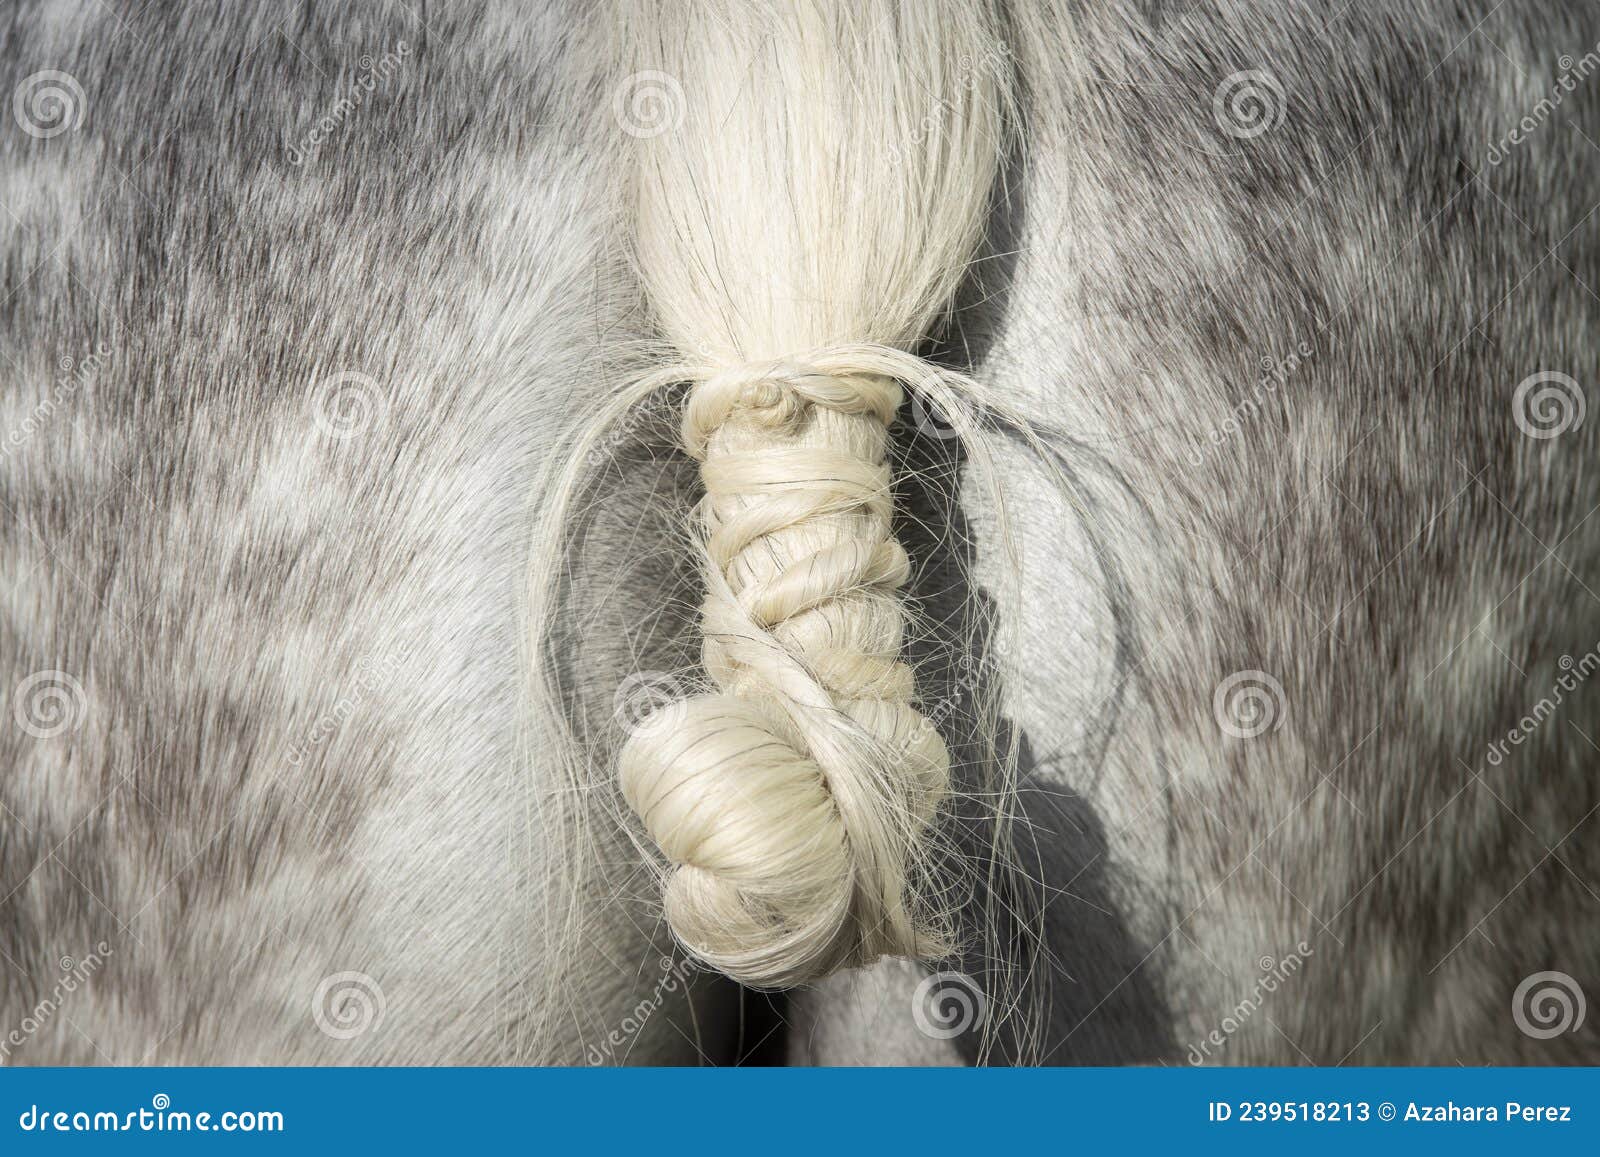 detail of the tail knot of a spanish horse in doma vaquera